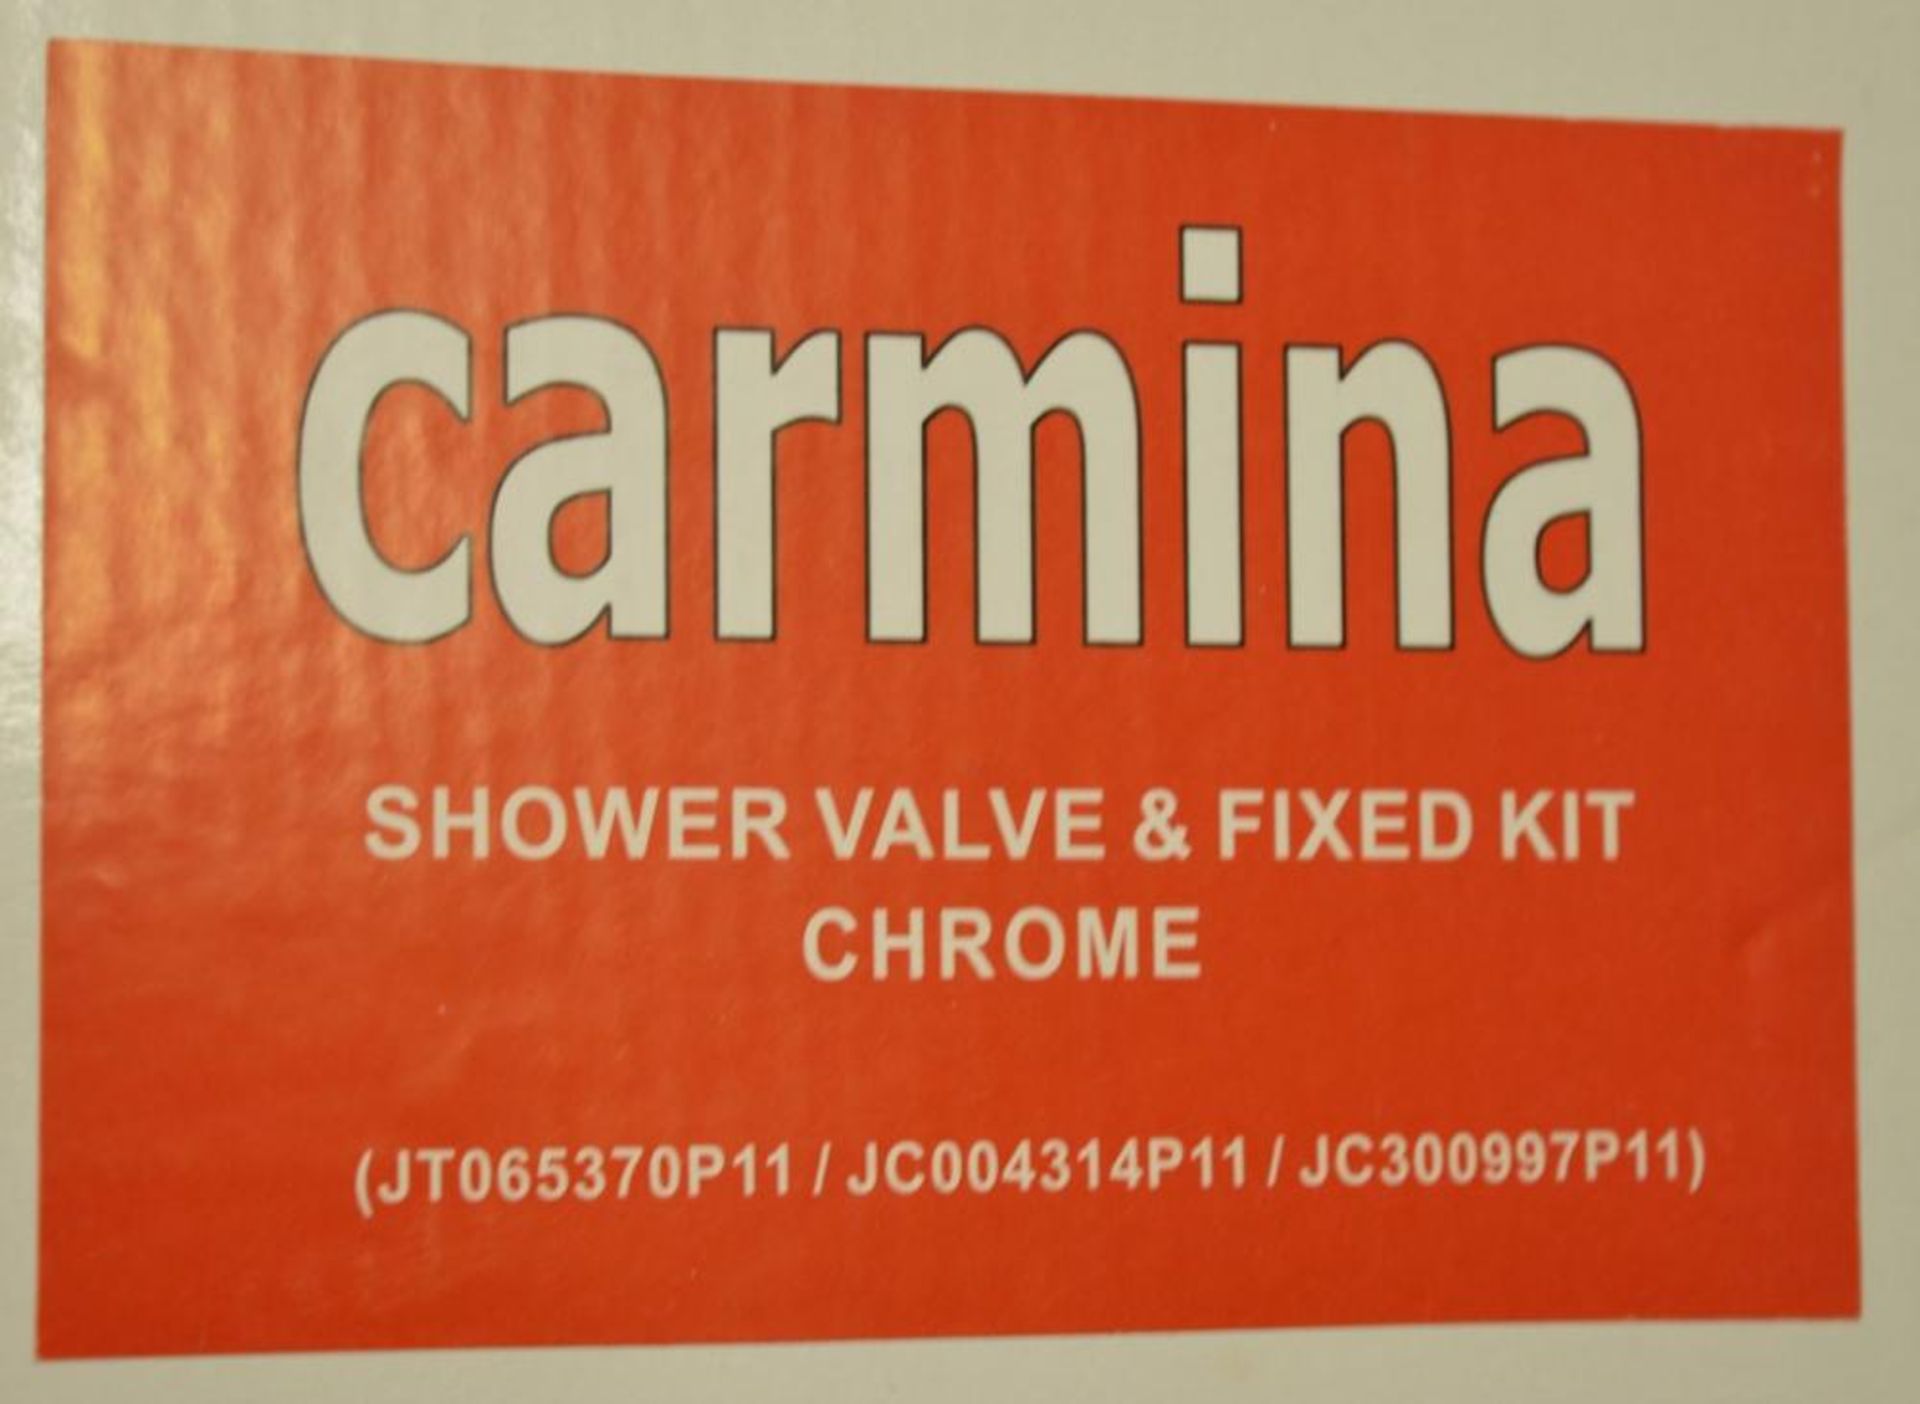 1 x Carmina Shower Valve Kit - Contains Chrome Shower Head, Fixed Arm and Manual Control - Brass - Image 5 of 7